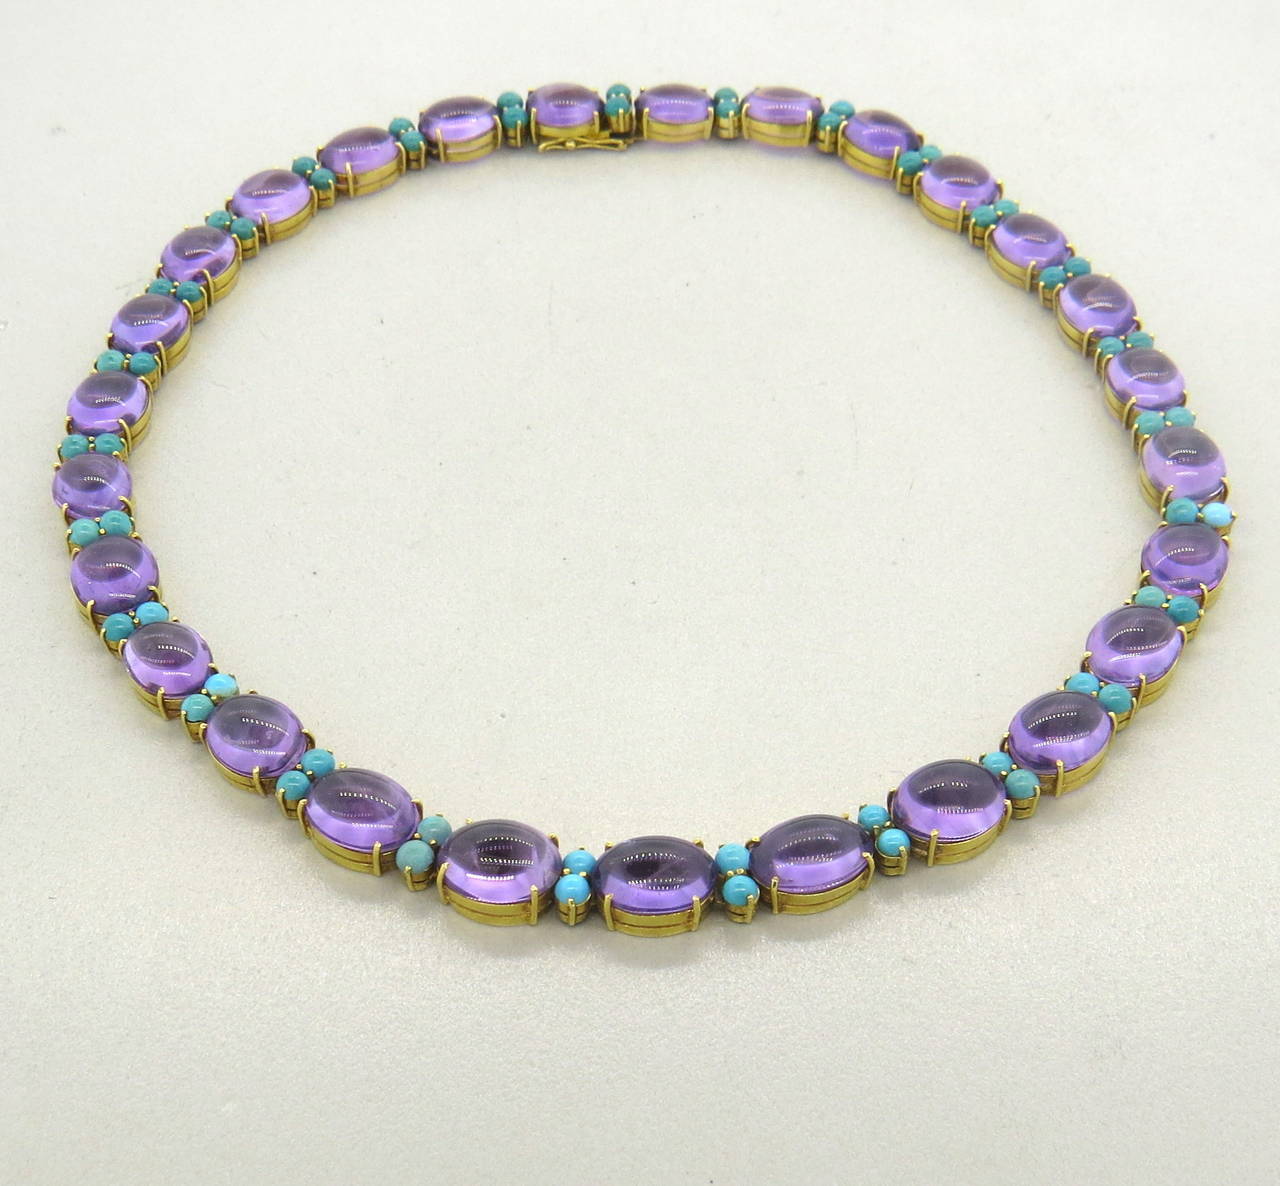 An 18k yellow gold necklace set with Amethyst (12mm x 8.5mm) and Turquoise ( 3.3mm in diameter).  The necklace measures 16